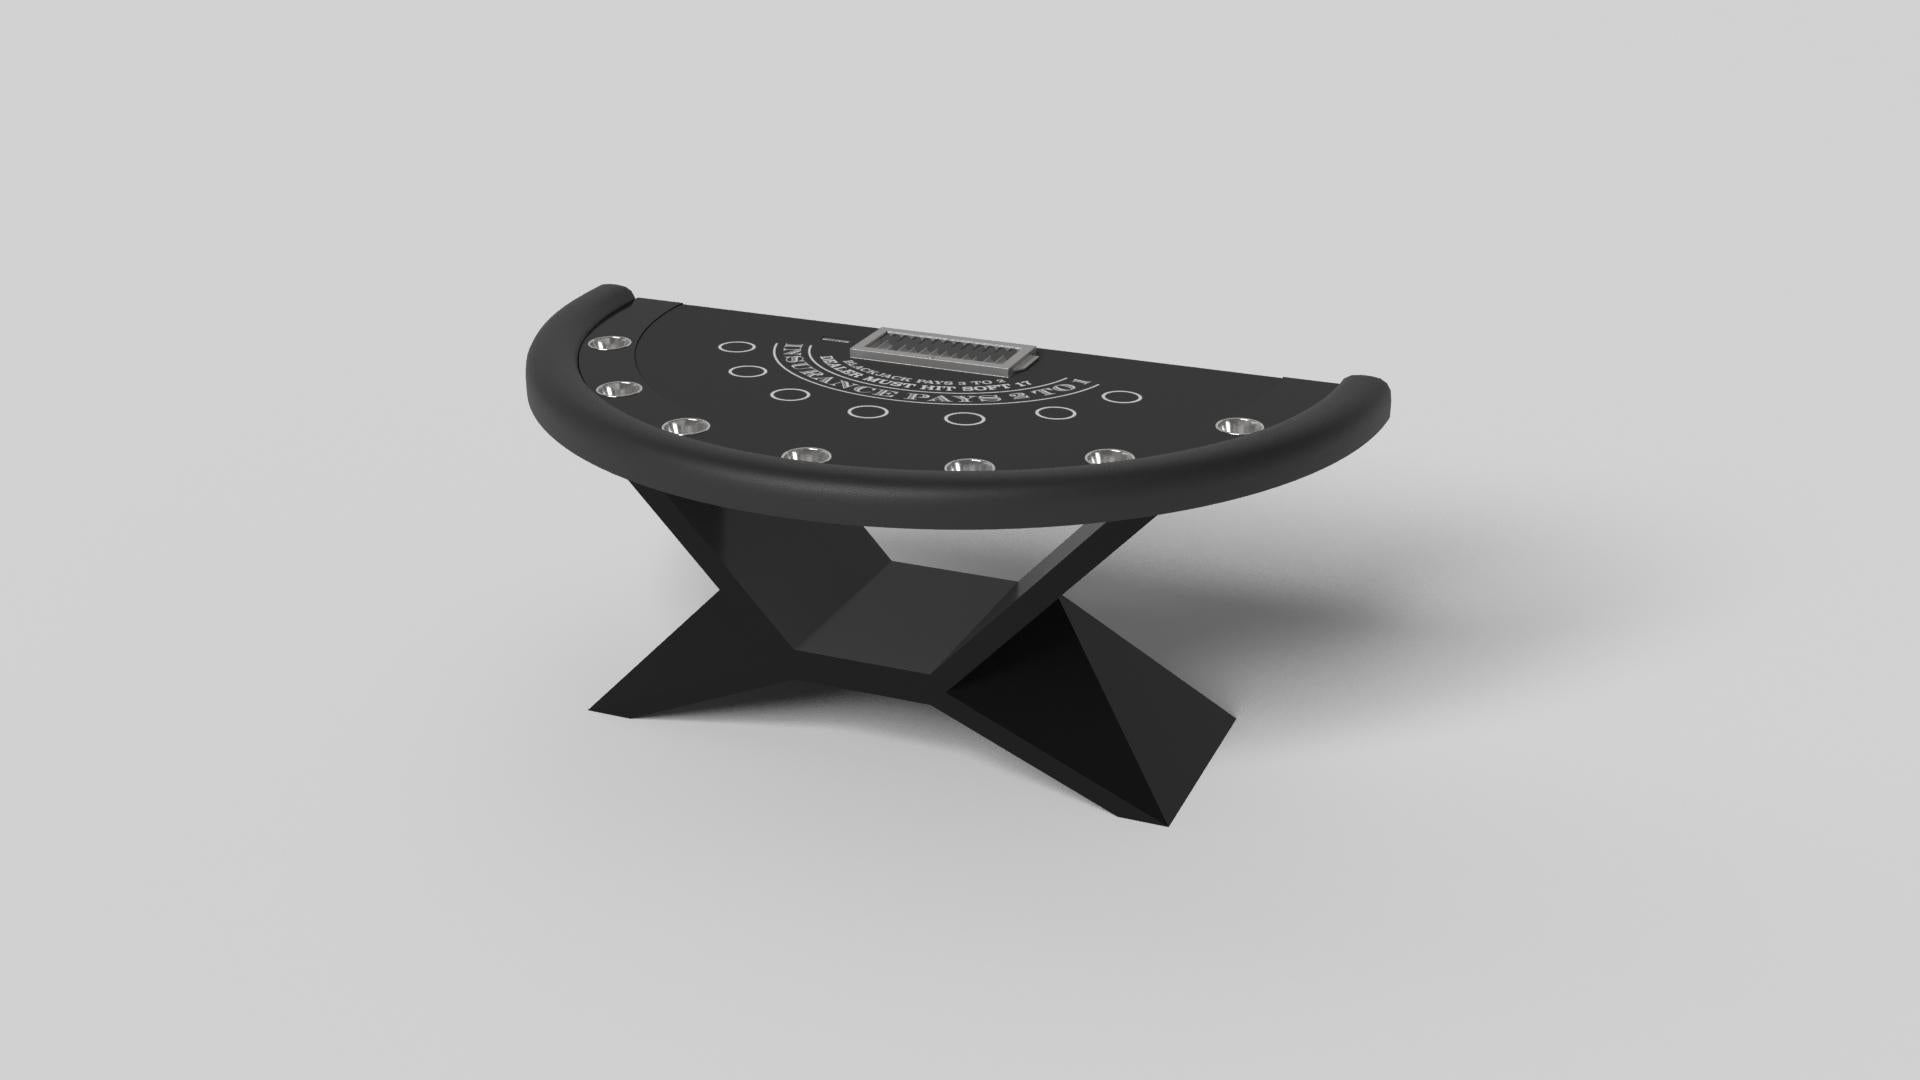 In chrome metal, the Kors blackjack table is a superior example of contrasting geometric forms. This table features an angular base that highlights the beauty of negative space from the front view. From the side view, it offers a completely